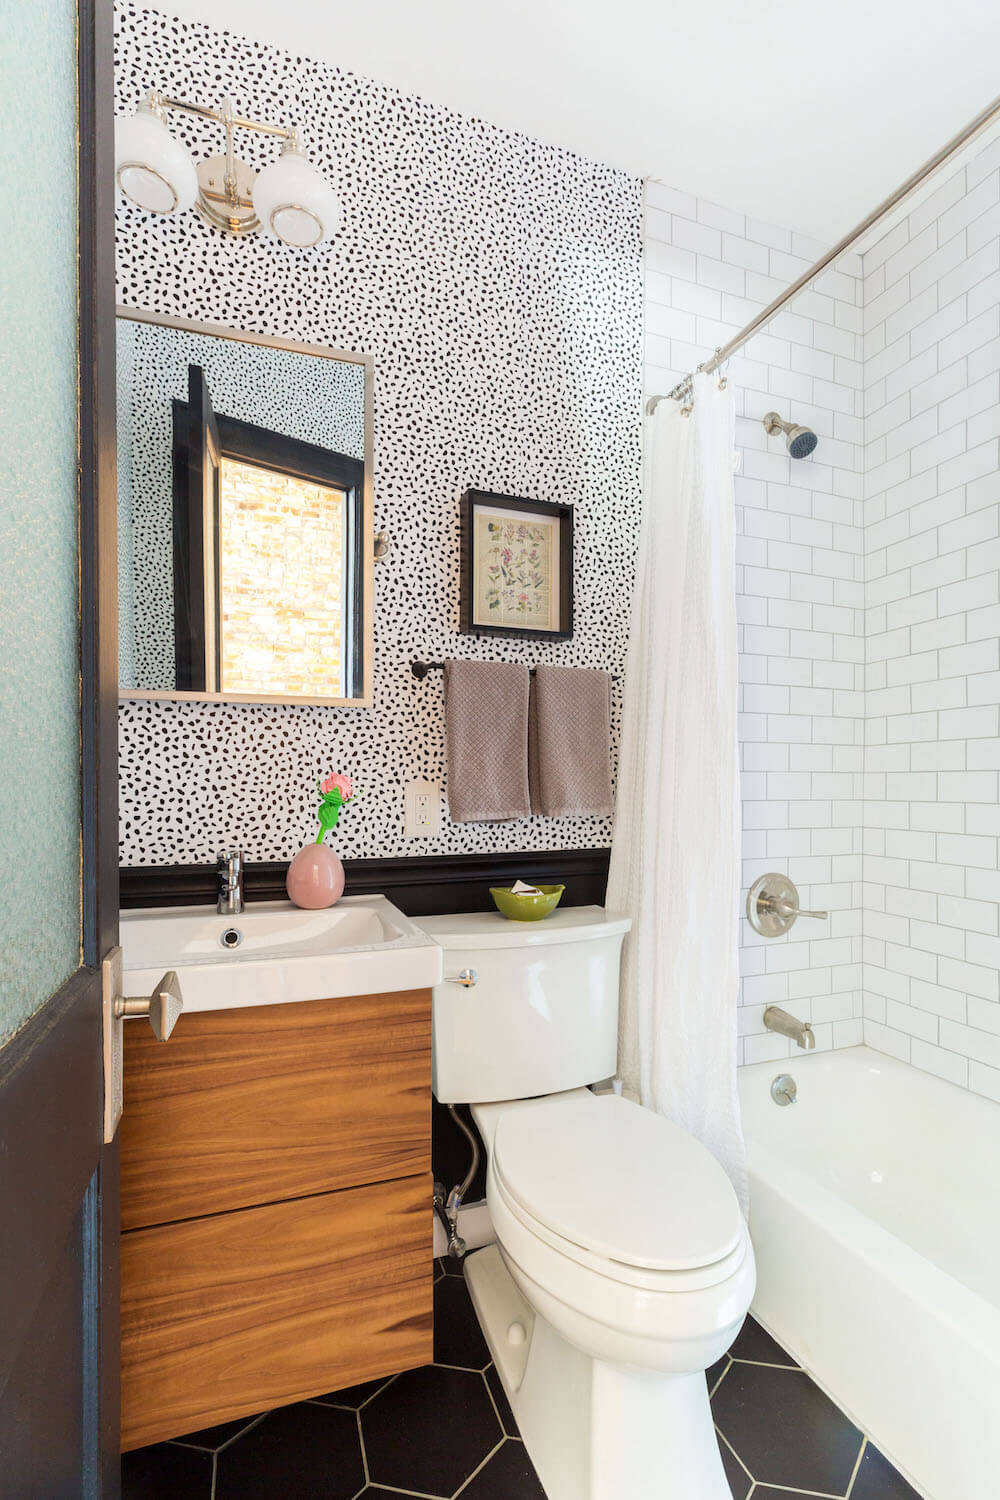 wallpaper in bathrooms with black hexagon tiles in a small bathroom with brown floating vanity and white bathtub after renovation